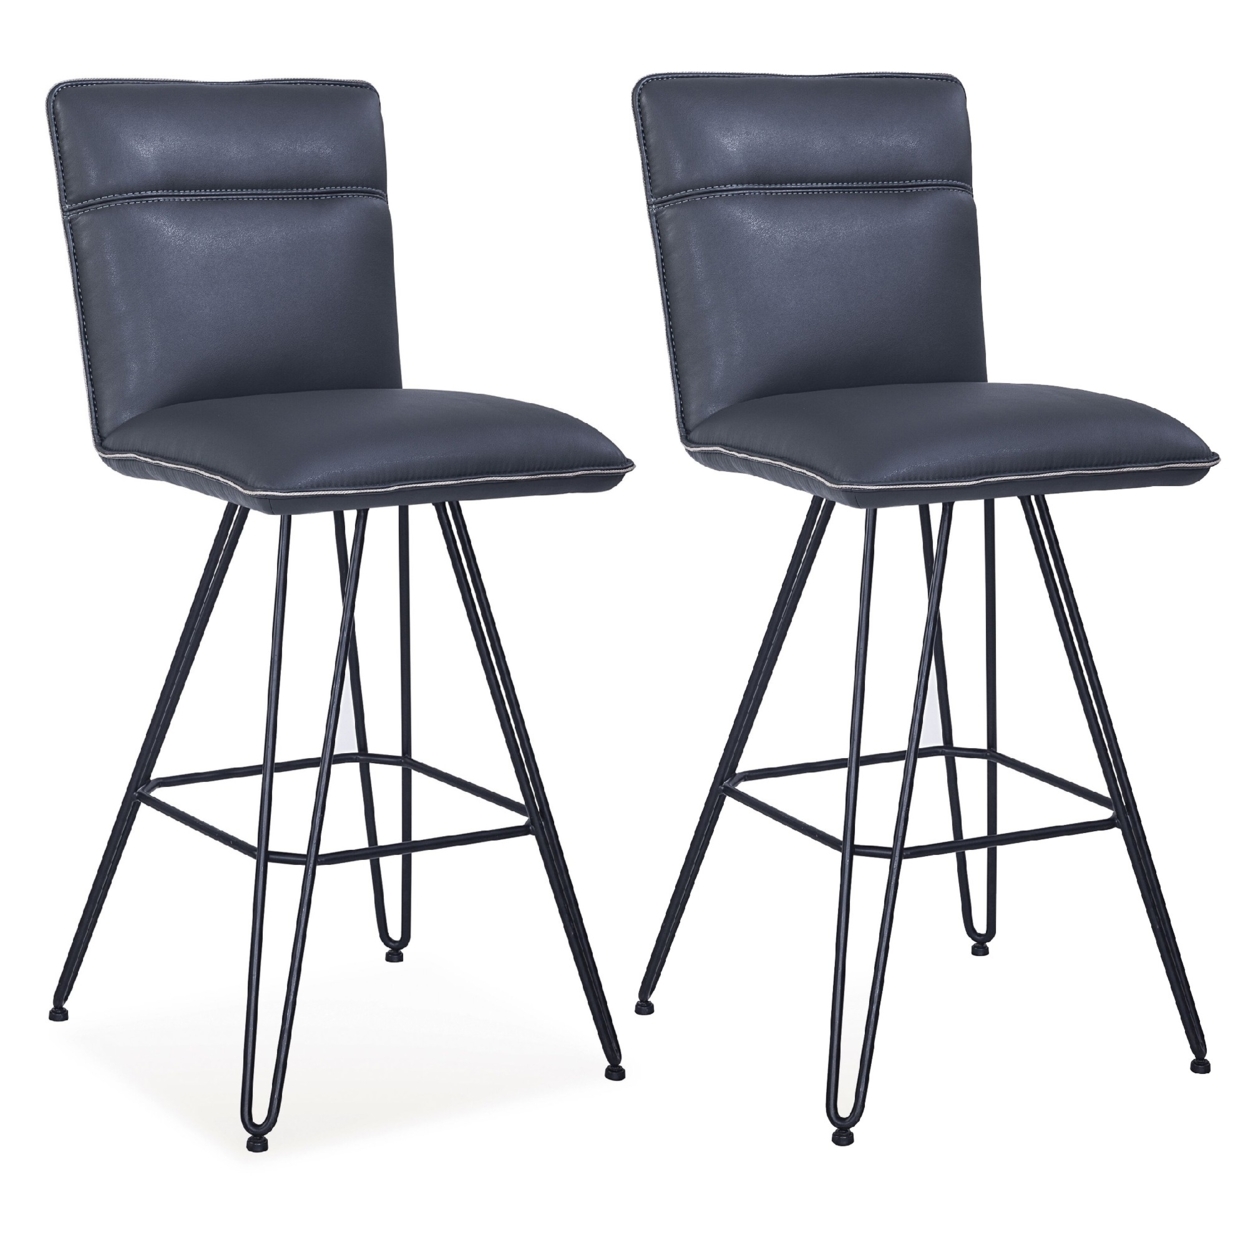 Saltoro Sherpi Metal Leather Upholstered Bar Height Stool with Hairpin Style Legs, Set of 2, Blue and Black